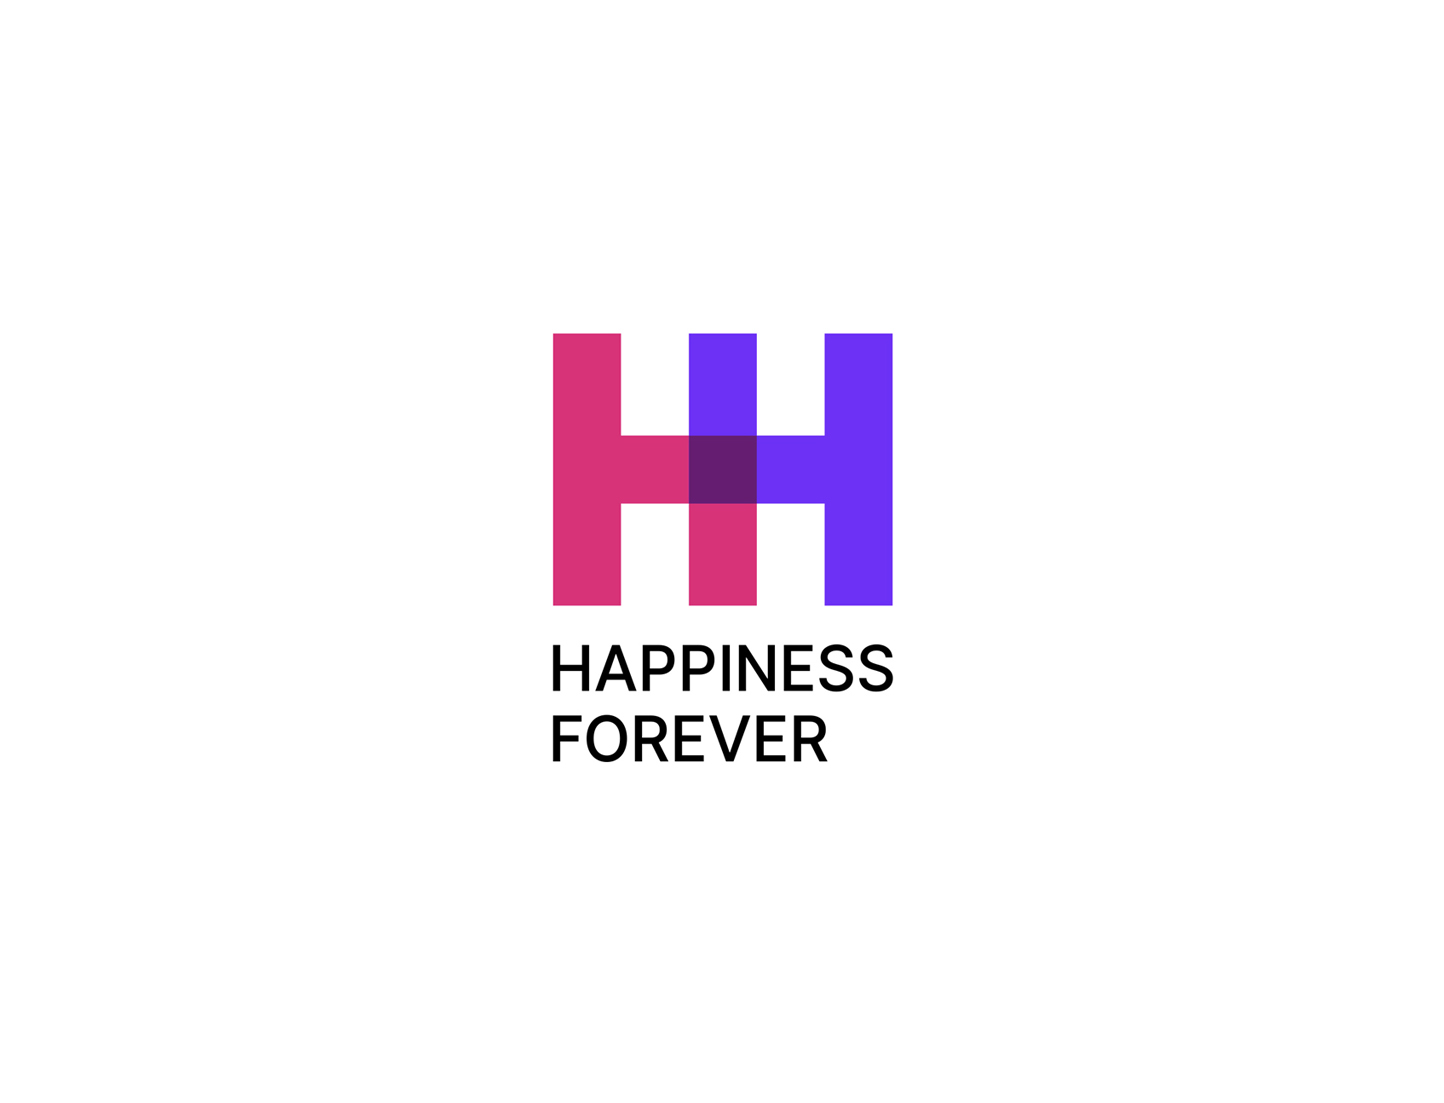 Happiness Forever